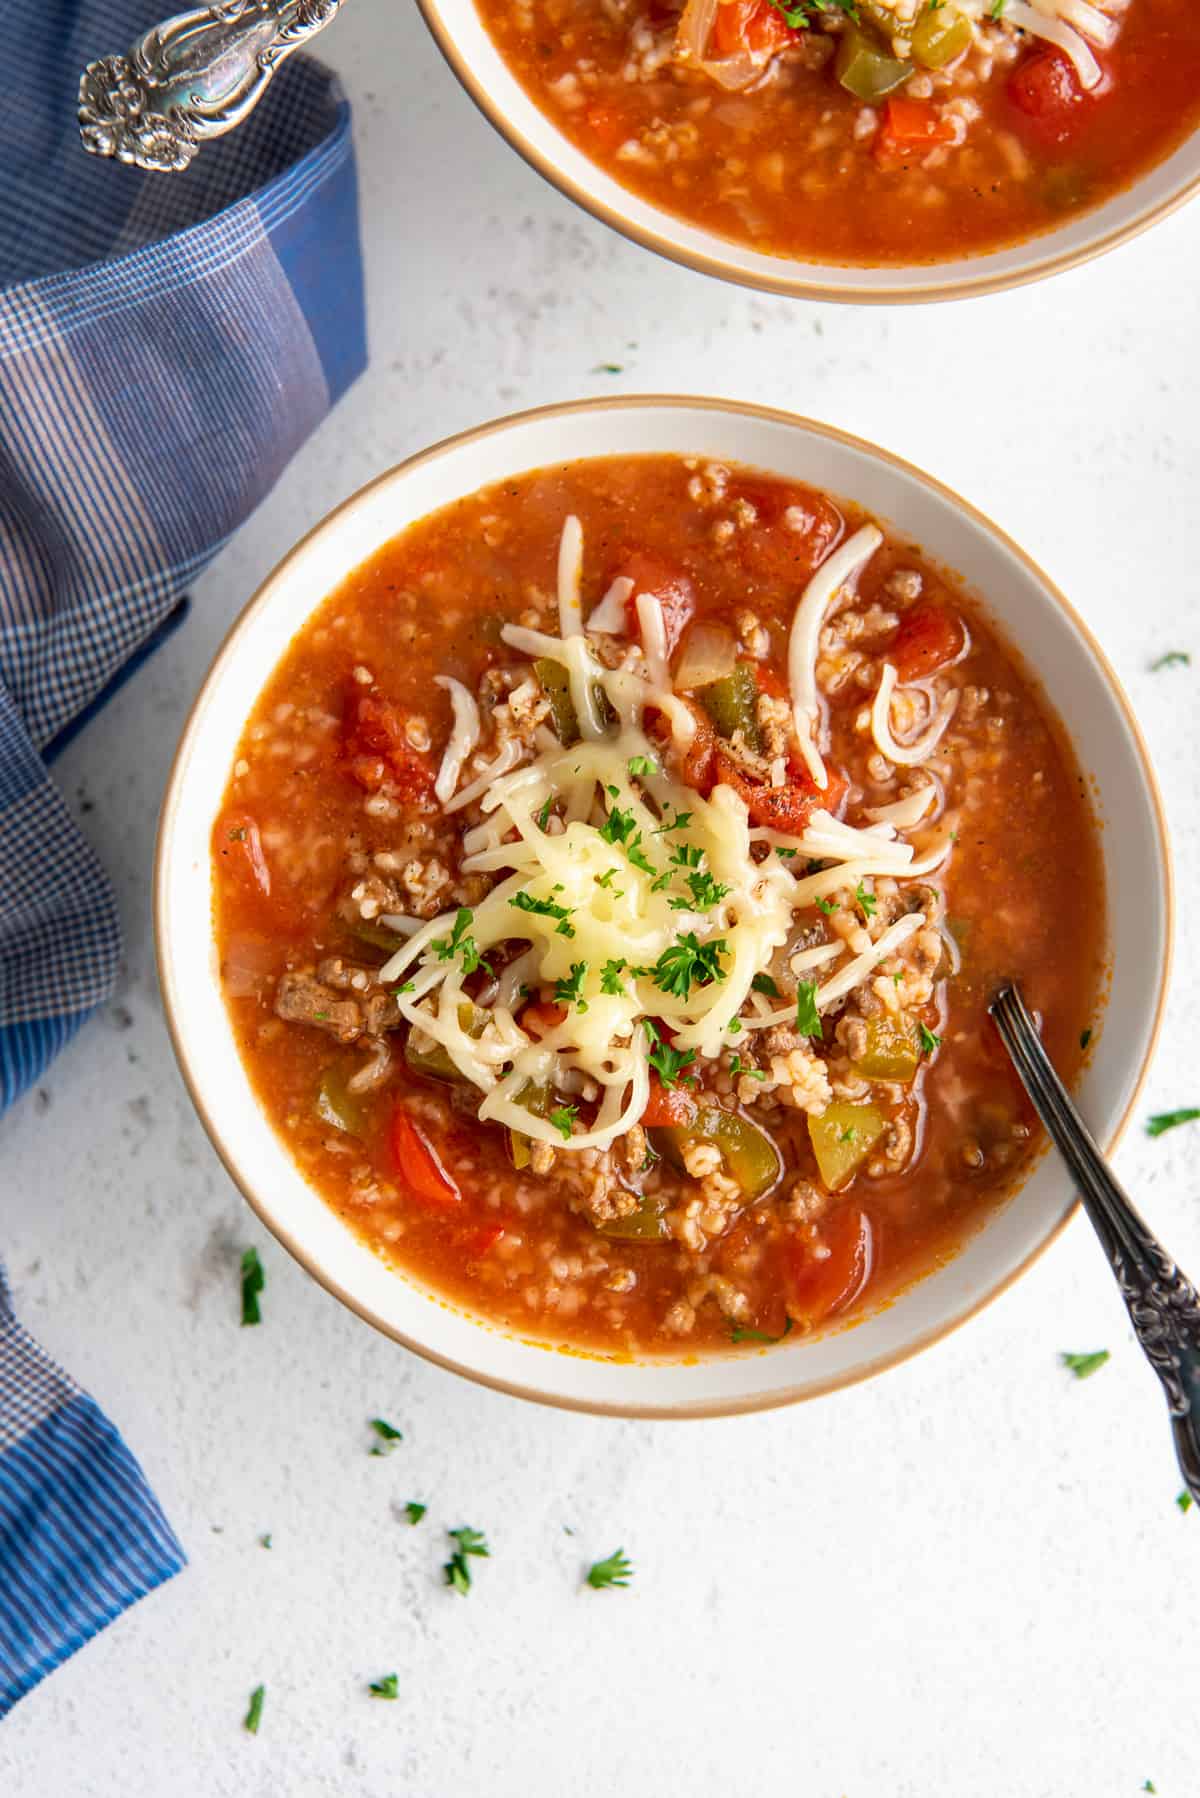 A top down shot of spoon resting in a bowl of soup with ground beef, rice, peppers, and topped with shredded cheese.